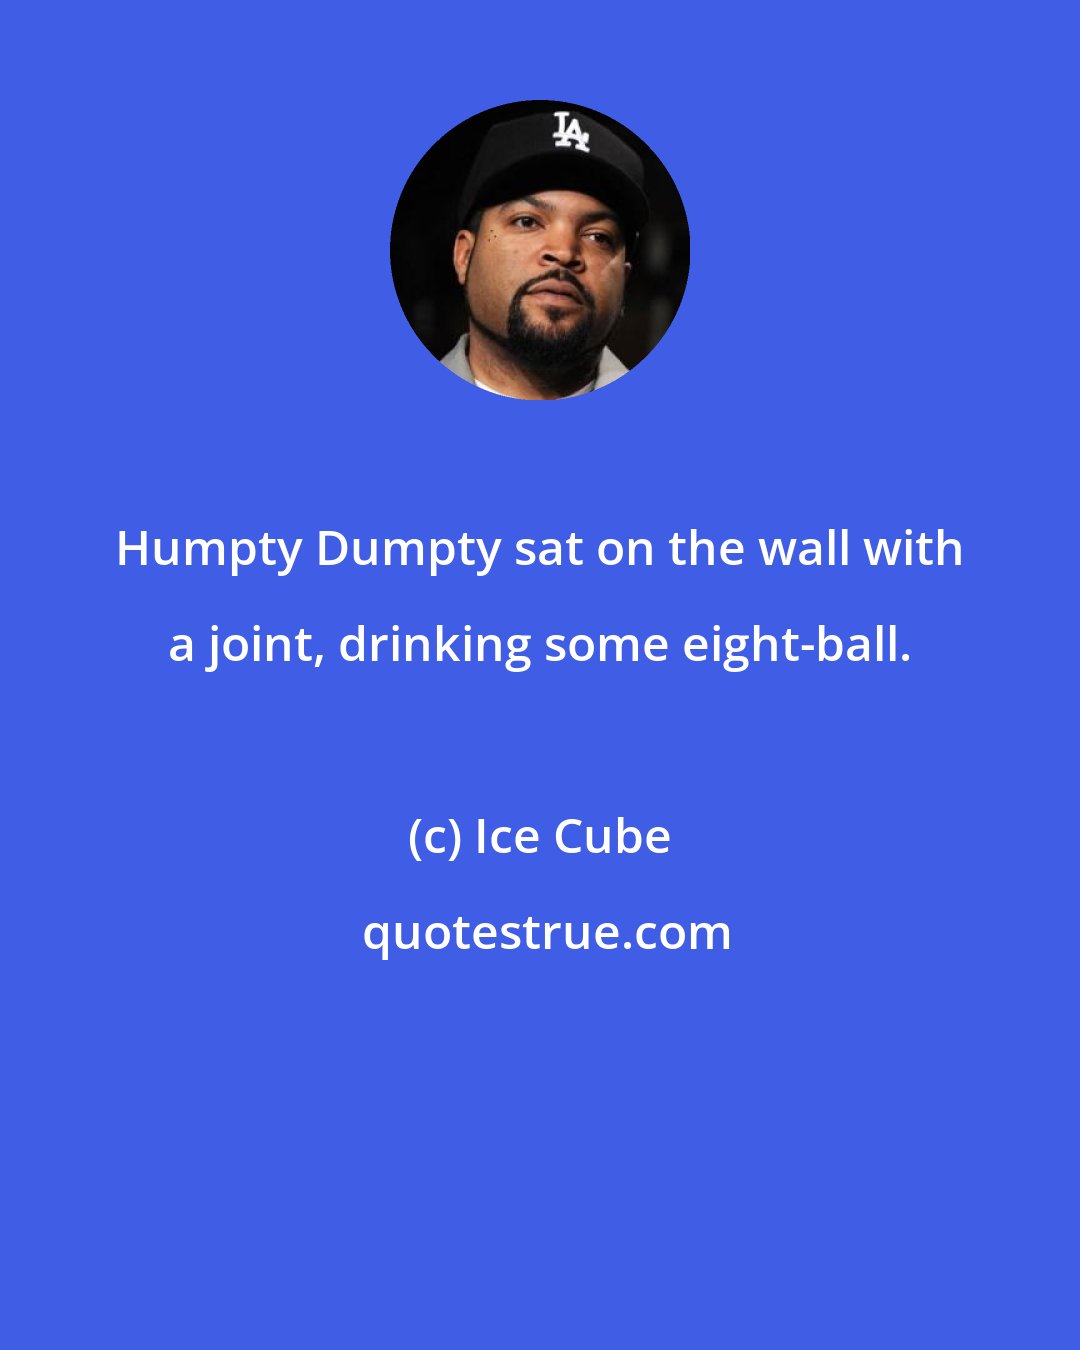 Ice Cube: Humpty Dumpty sat on the wall with a joint, drinking some eight-ball.